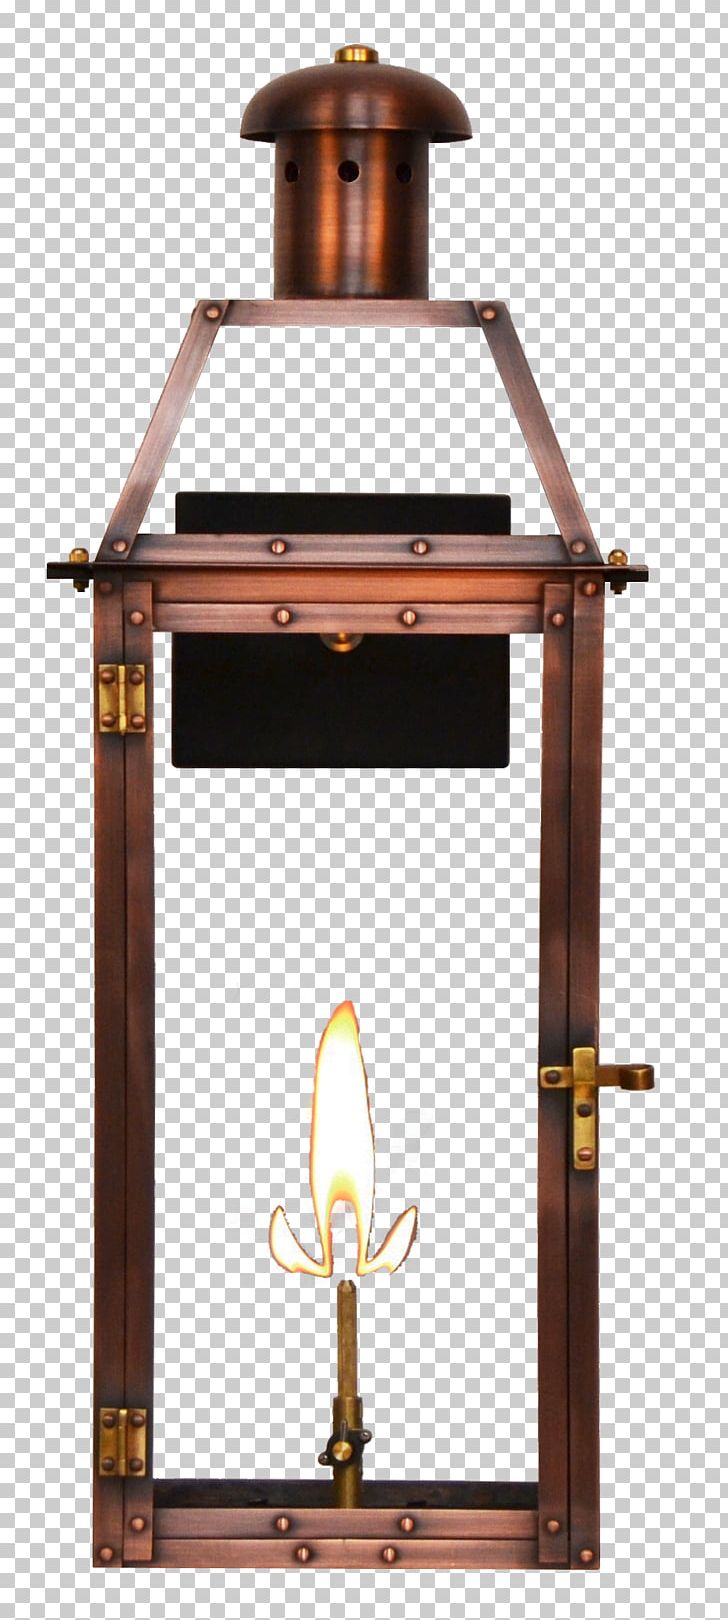 Gas Lighting Lantern Natural Gas Light Fixture PNG, Clipart, Candle, Ceiling Fixture, Coppersmith, Electricity, Gas Lighting Free PNG Download